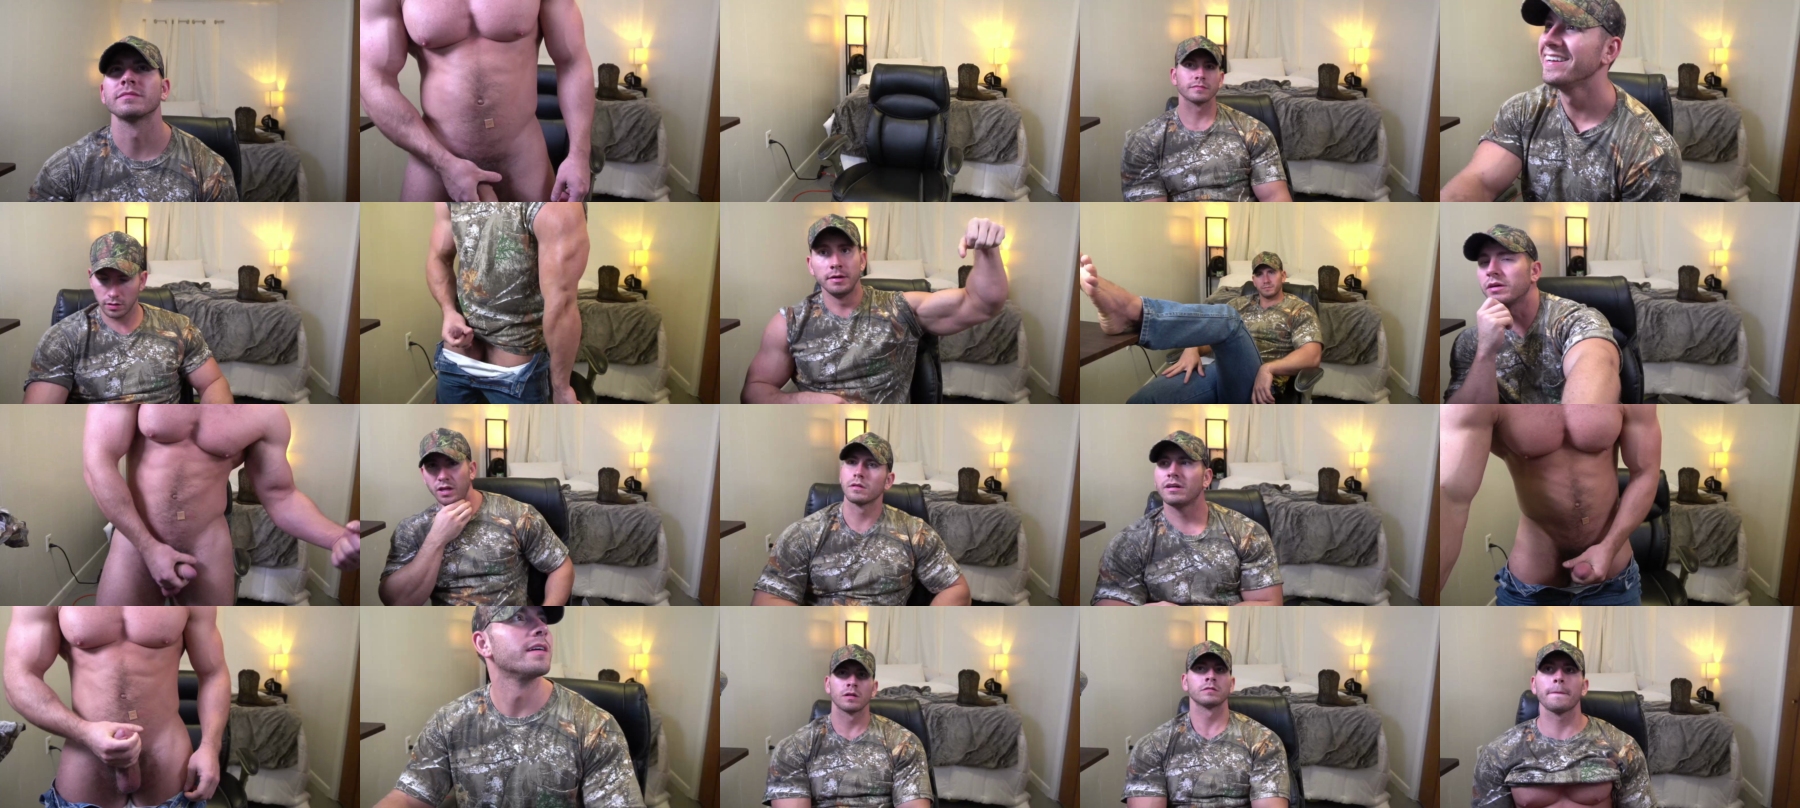 Hotmuscles6t9  07-10-2021 Male Porn